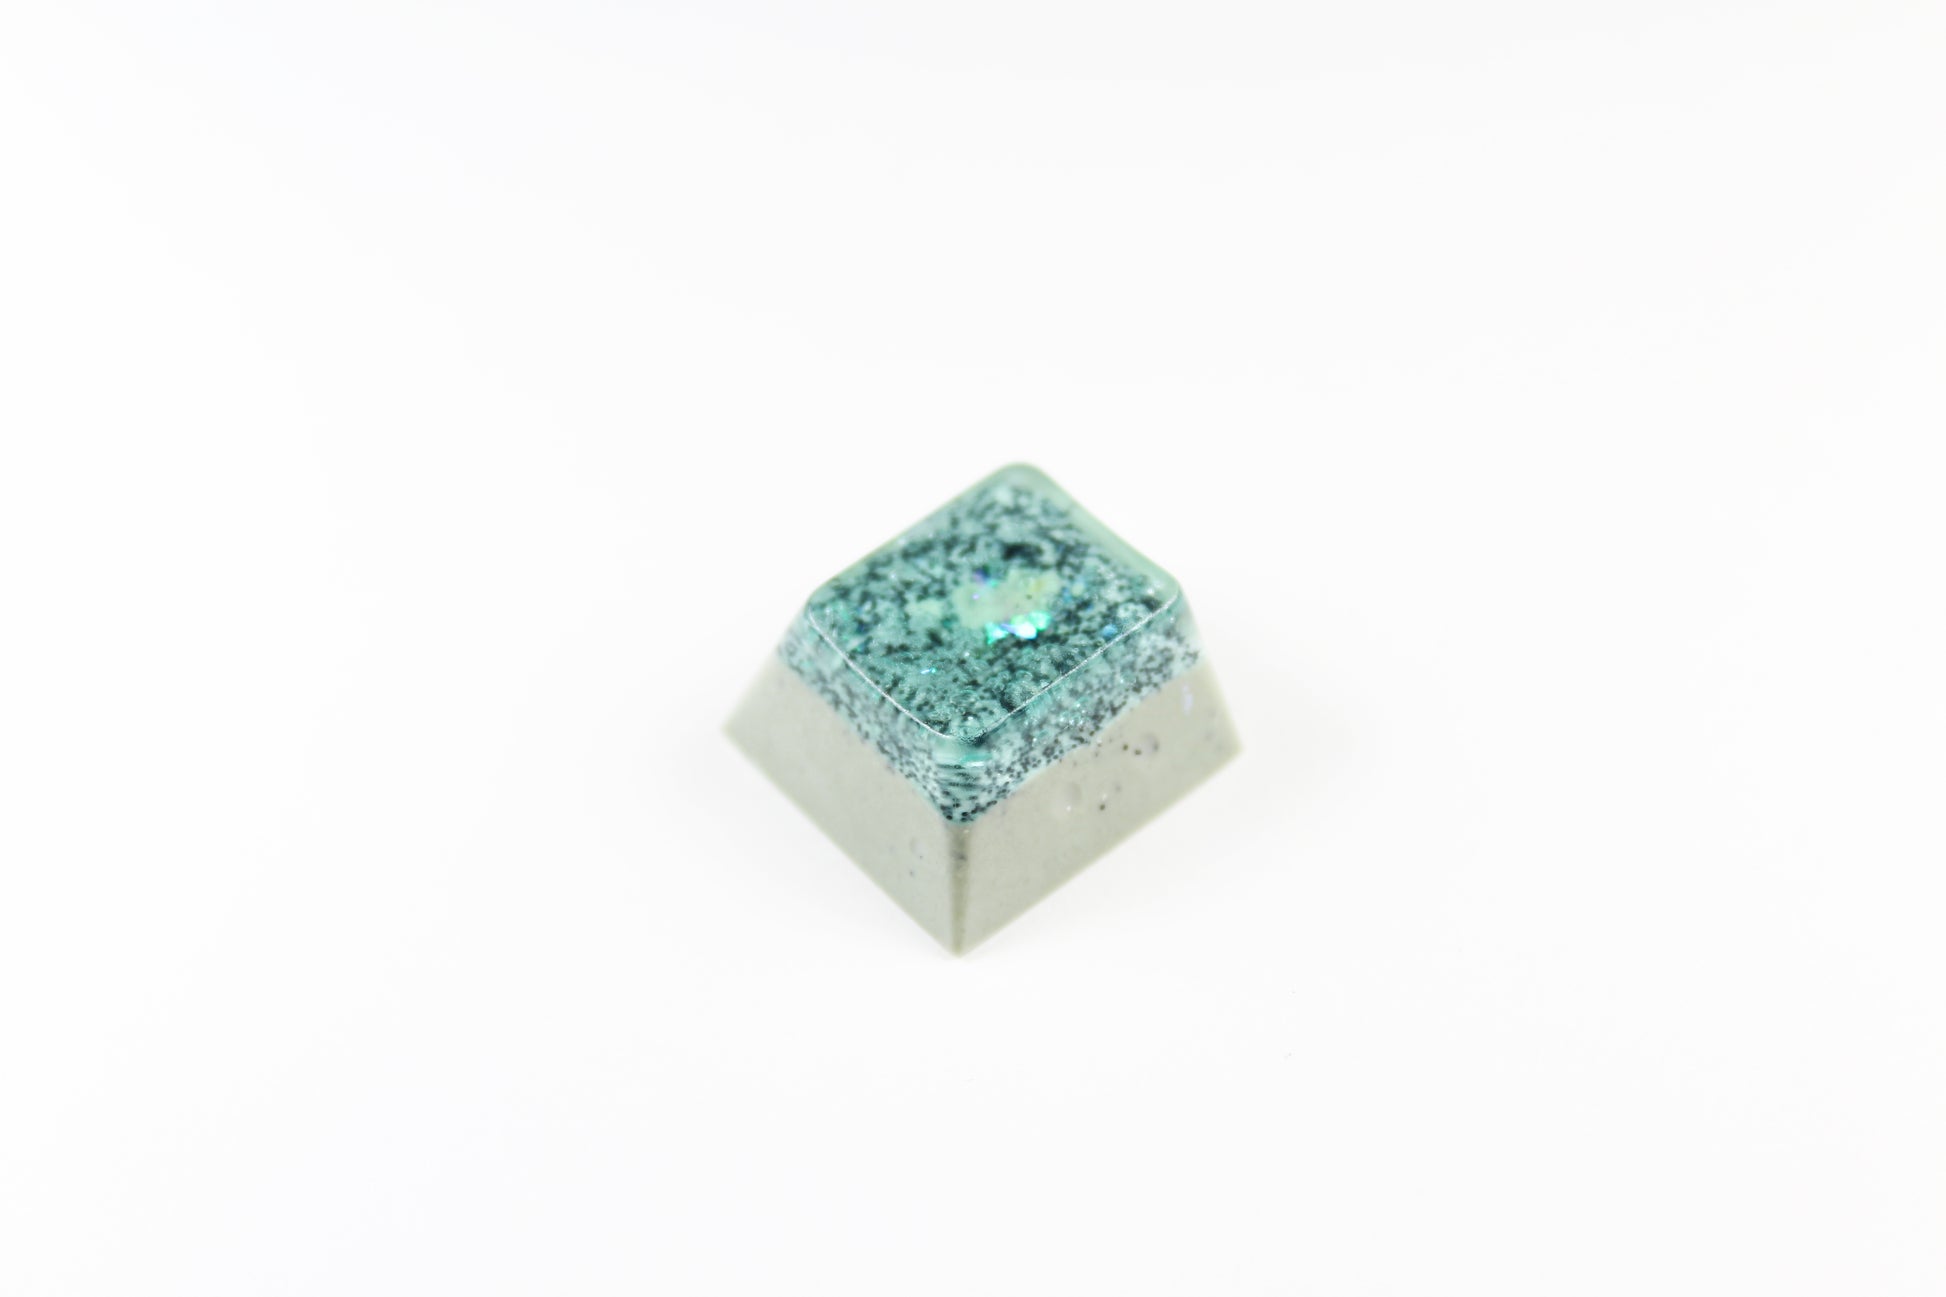 Cherry Esc - Anchor Point -2 - PrimeCaps Keycap - Blank and Sculpted Artisan Keycaps for cherry MX mechanical keyboards 